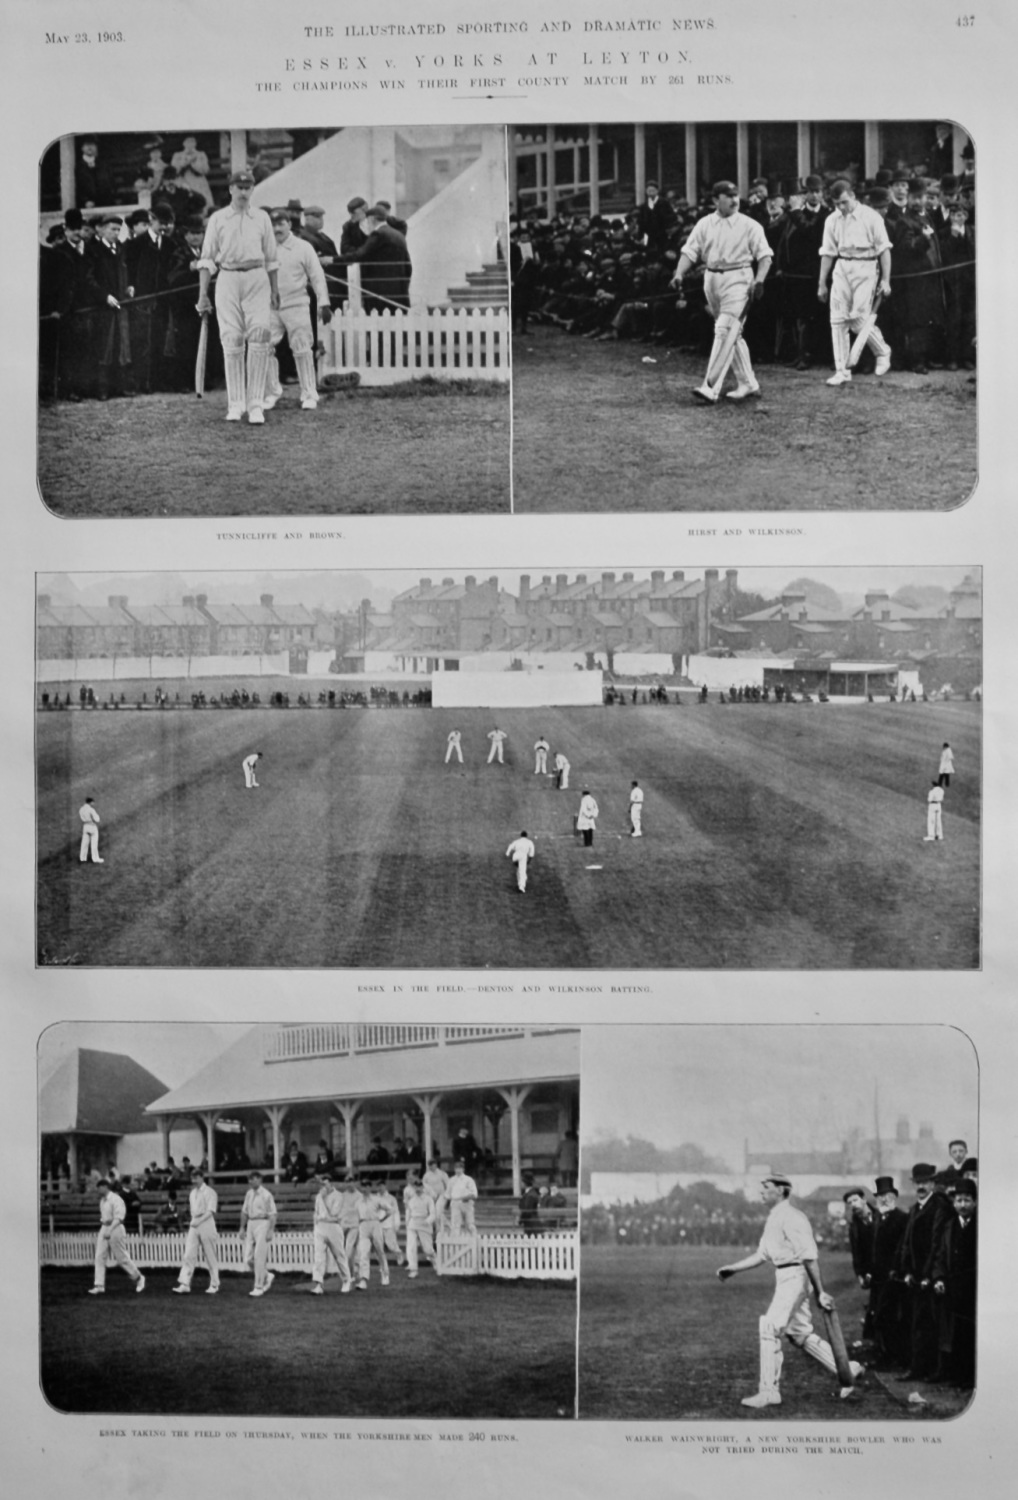 Essex v. Yorks at Leyton. : The Champions win their First County Match by 2